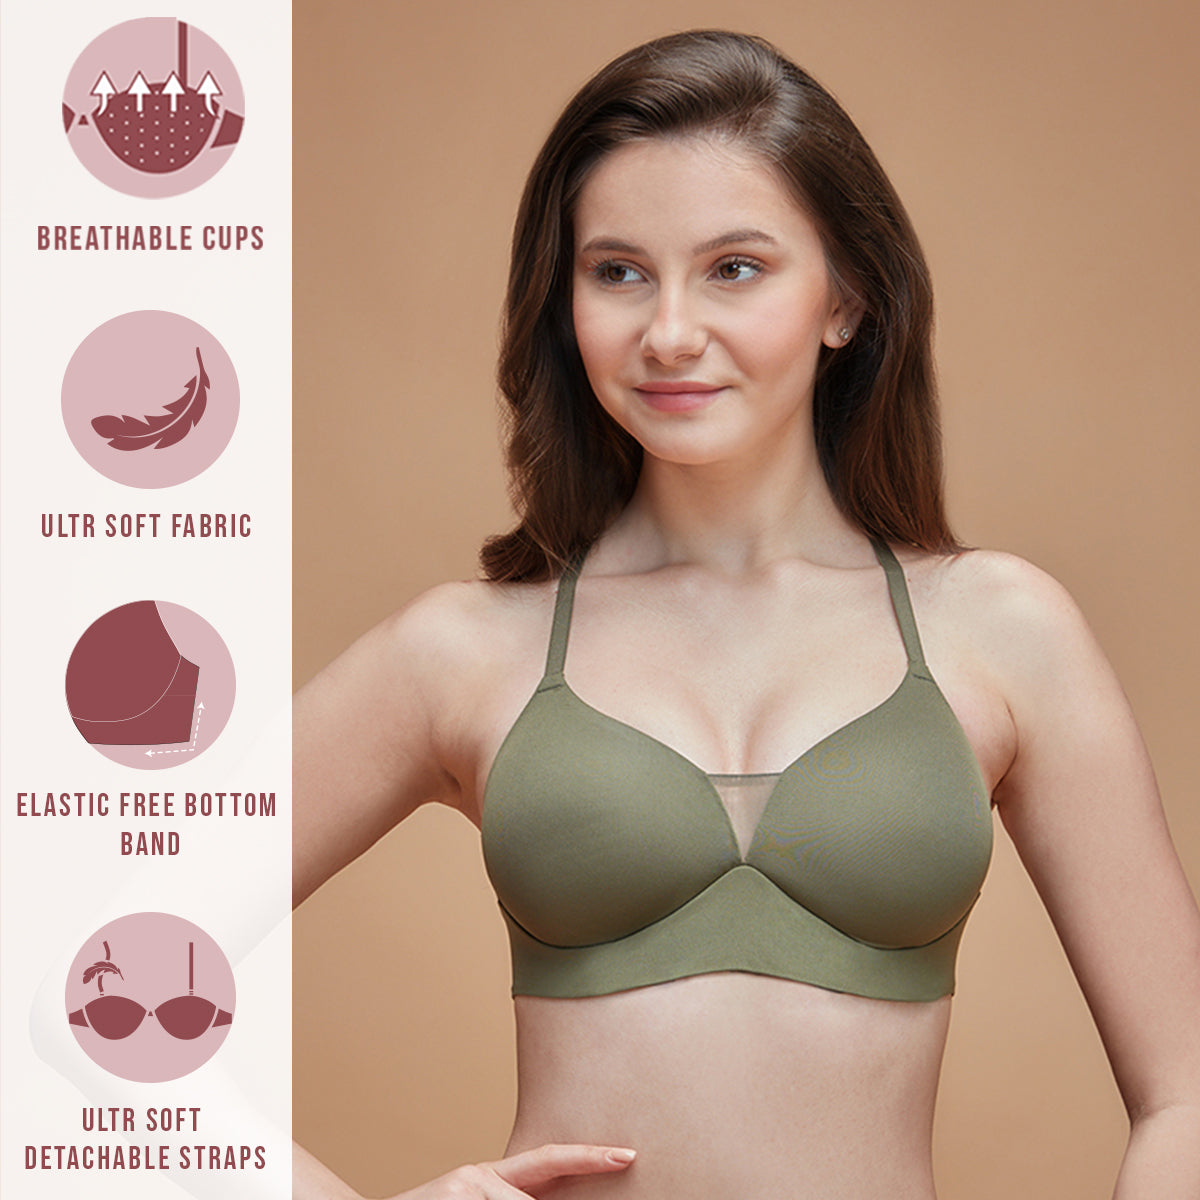 Barely There Women's Invisible Look Soft-Cup Bra